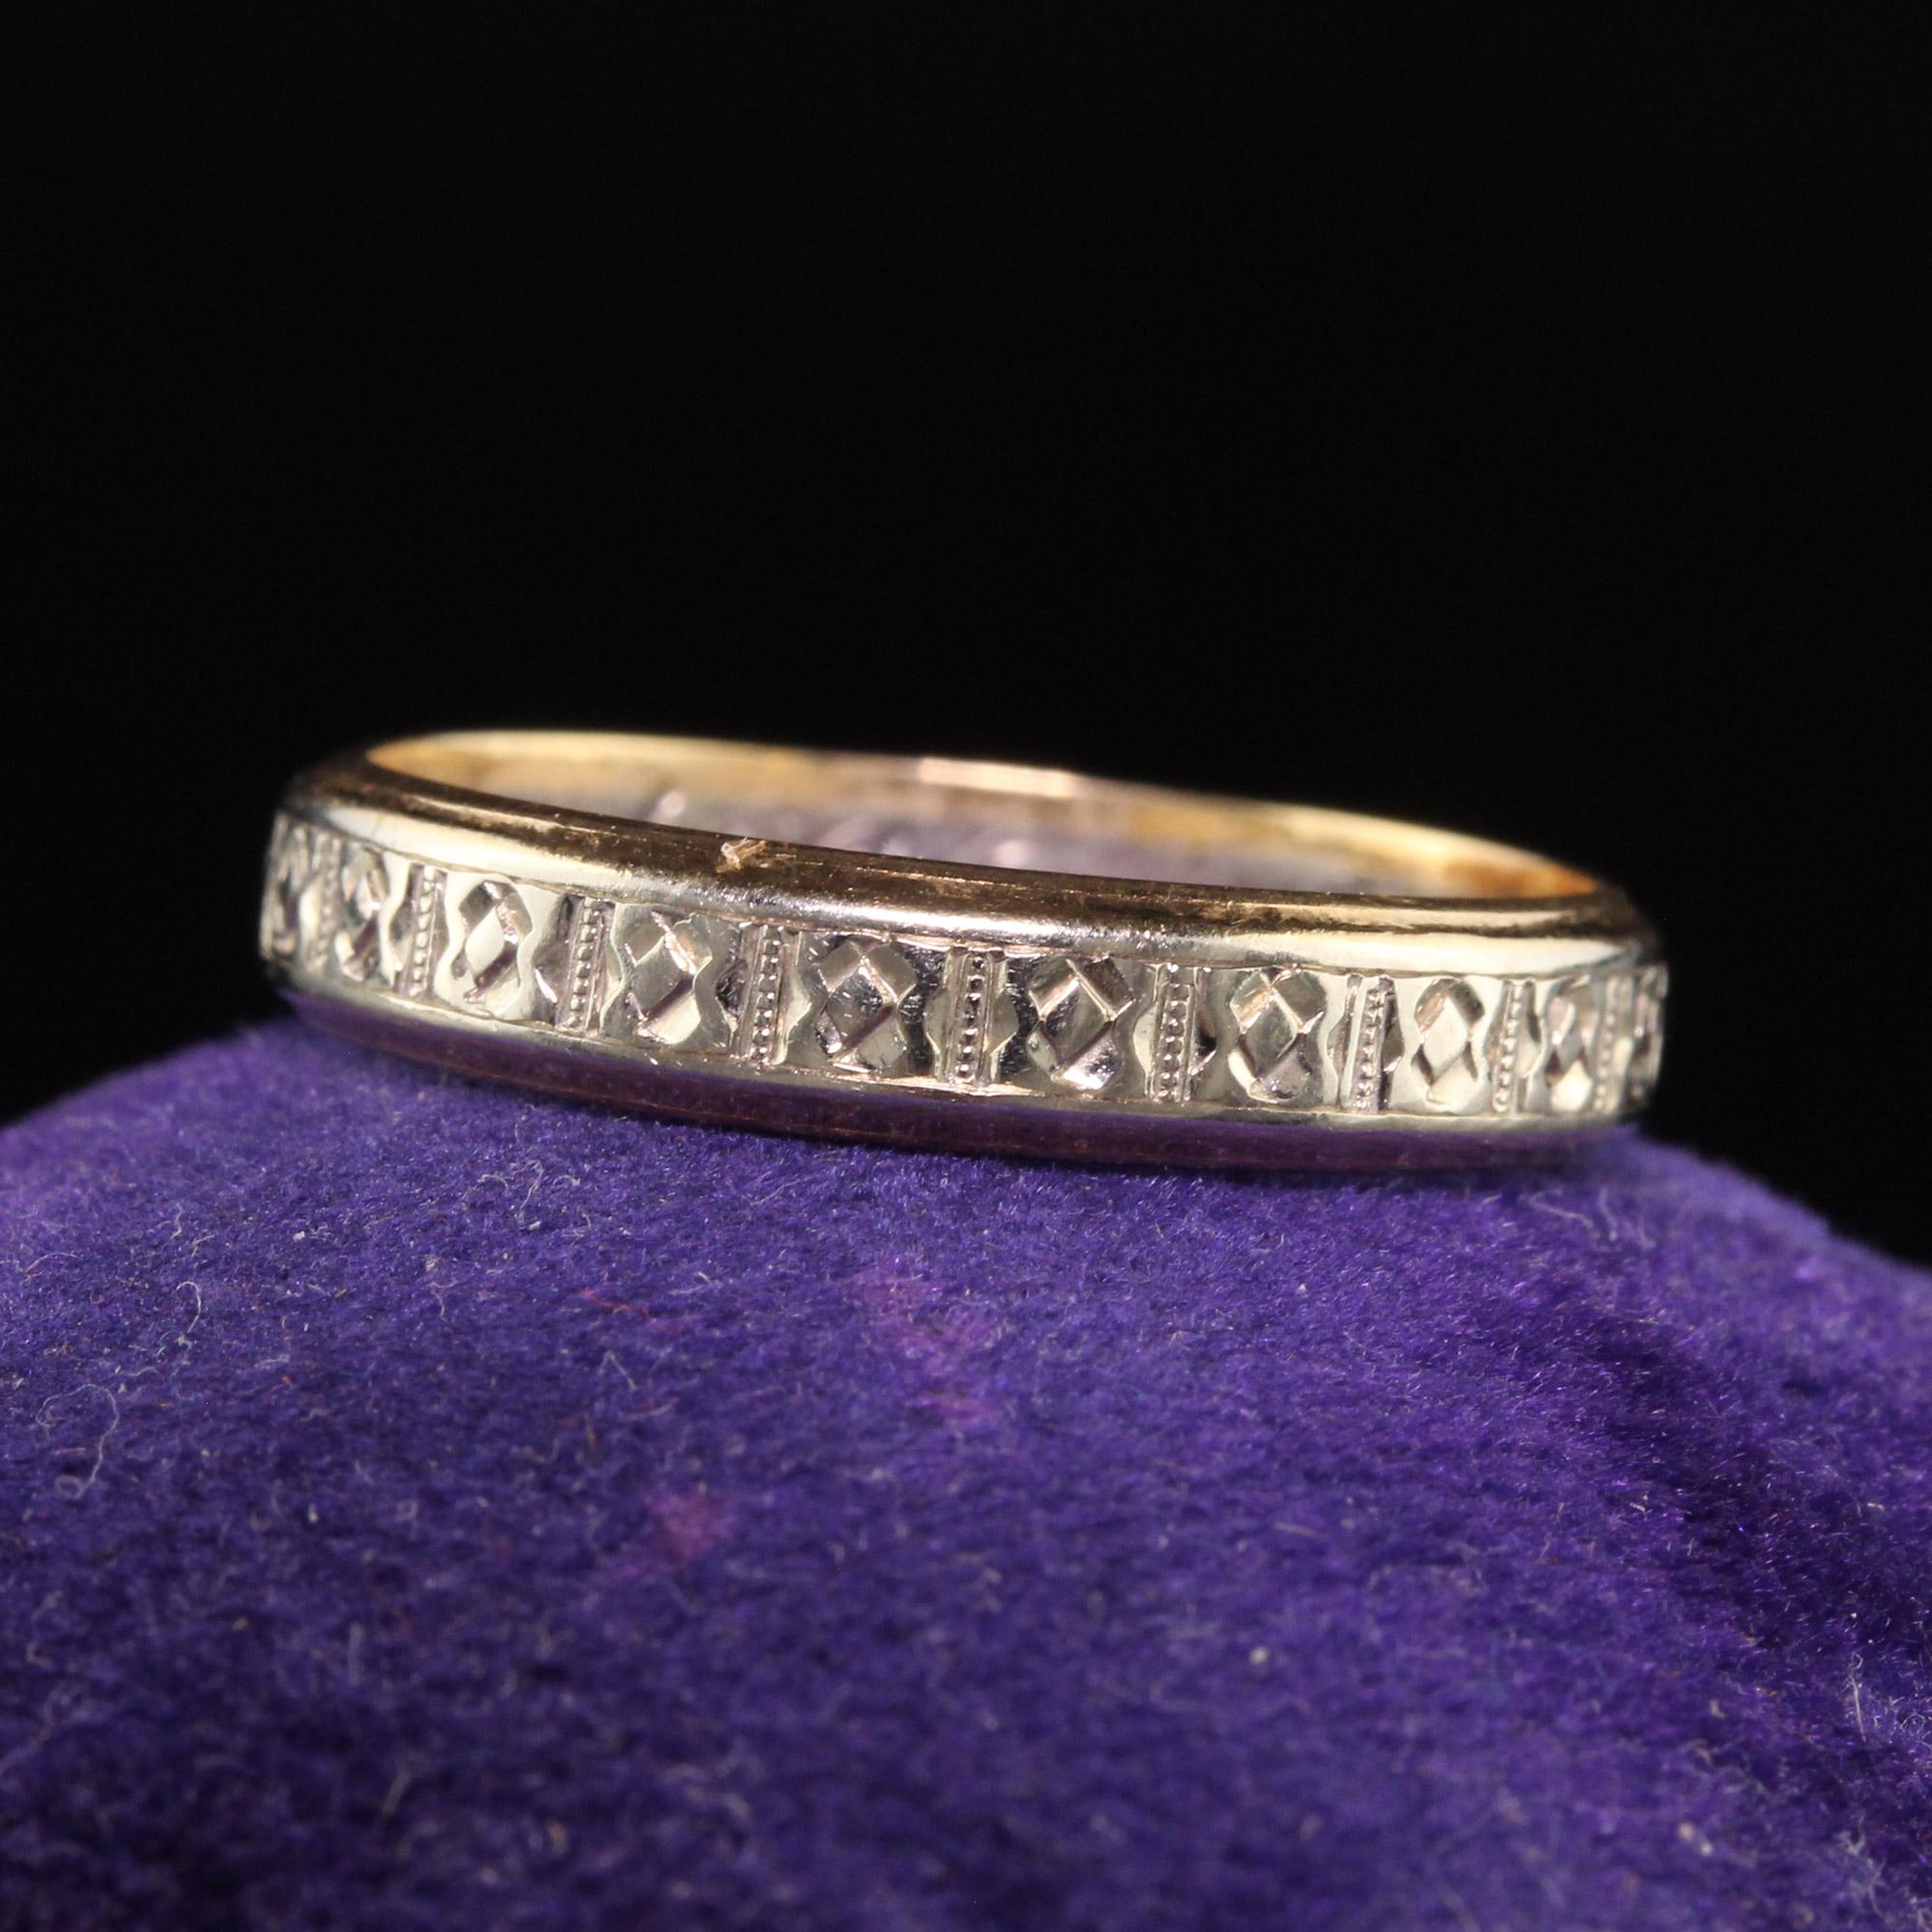 Beautiful Antique Art Deco 14K Yellow and White Gold Engraved Wedding Band. This beautiful wedding band is crafted in14K white and yellow gold and has engravings going around the entire ring. The inside of the band is engraved 